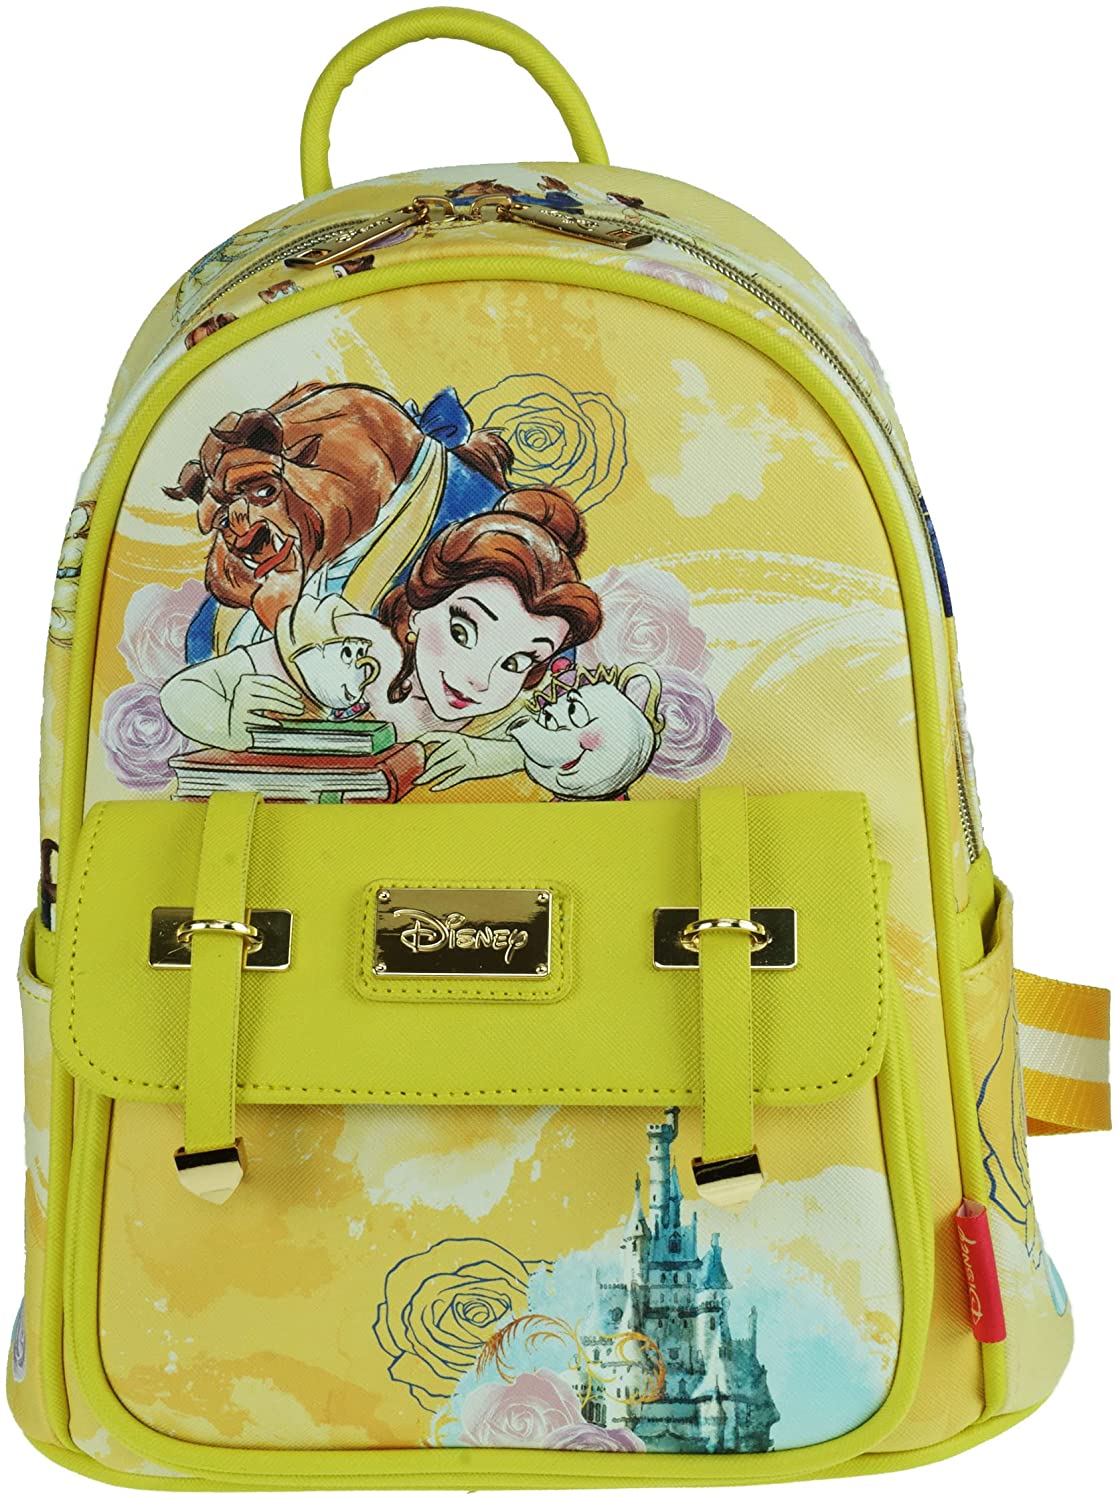 Beauty and the Beast 11" Vegan Leather Mini Backpack - A21951 - GTE Zone